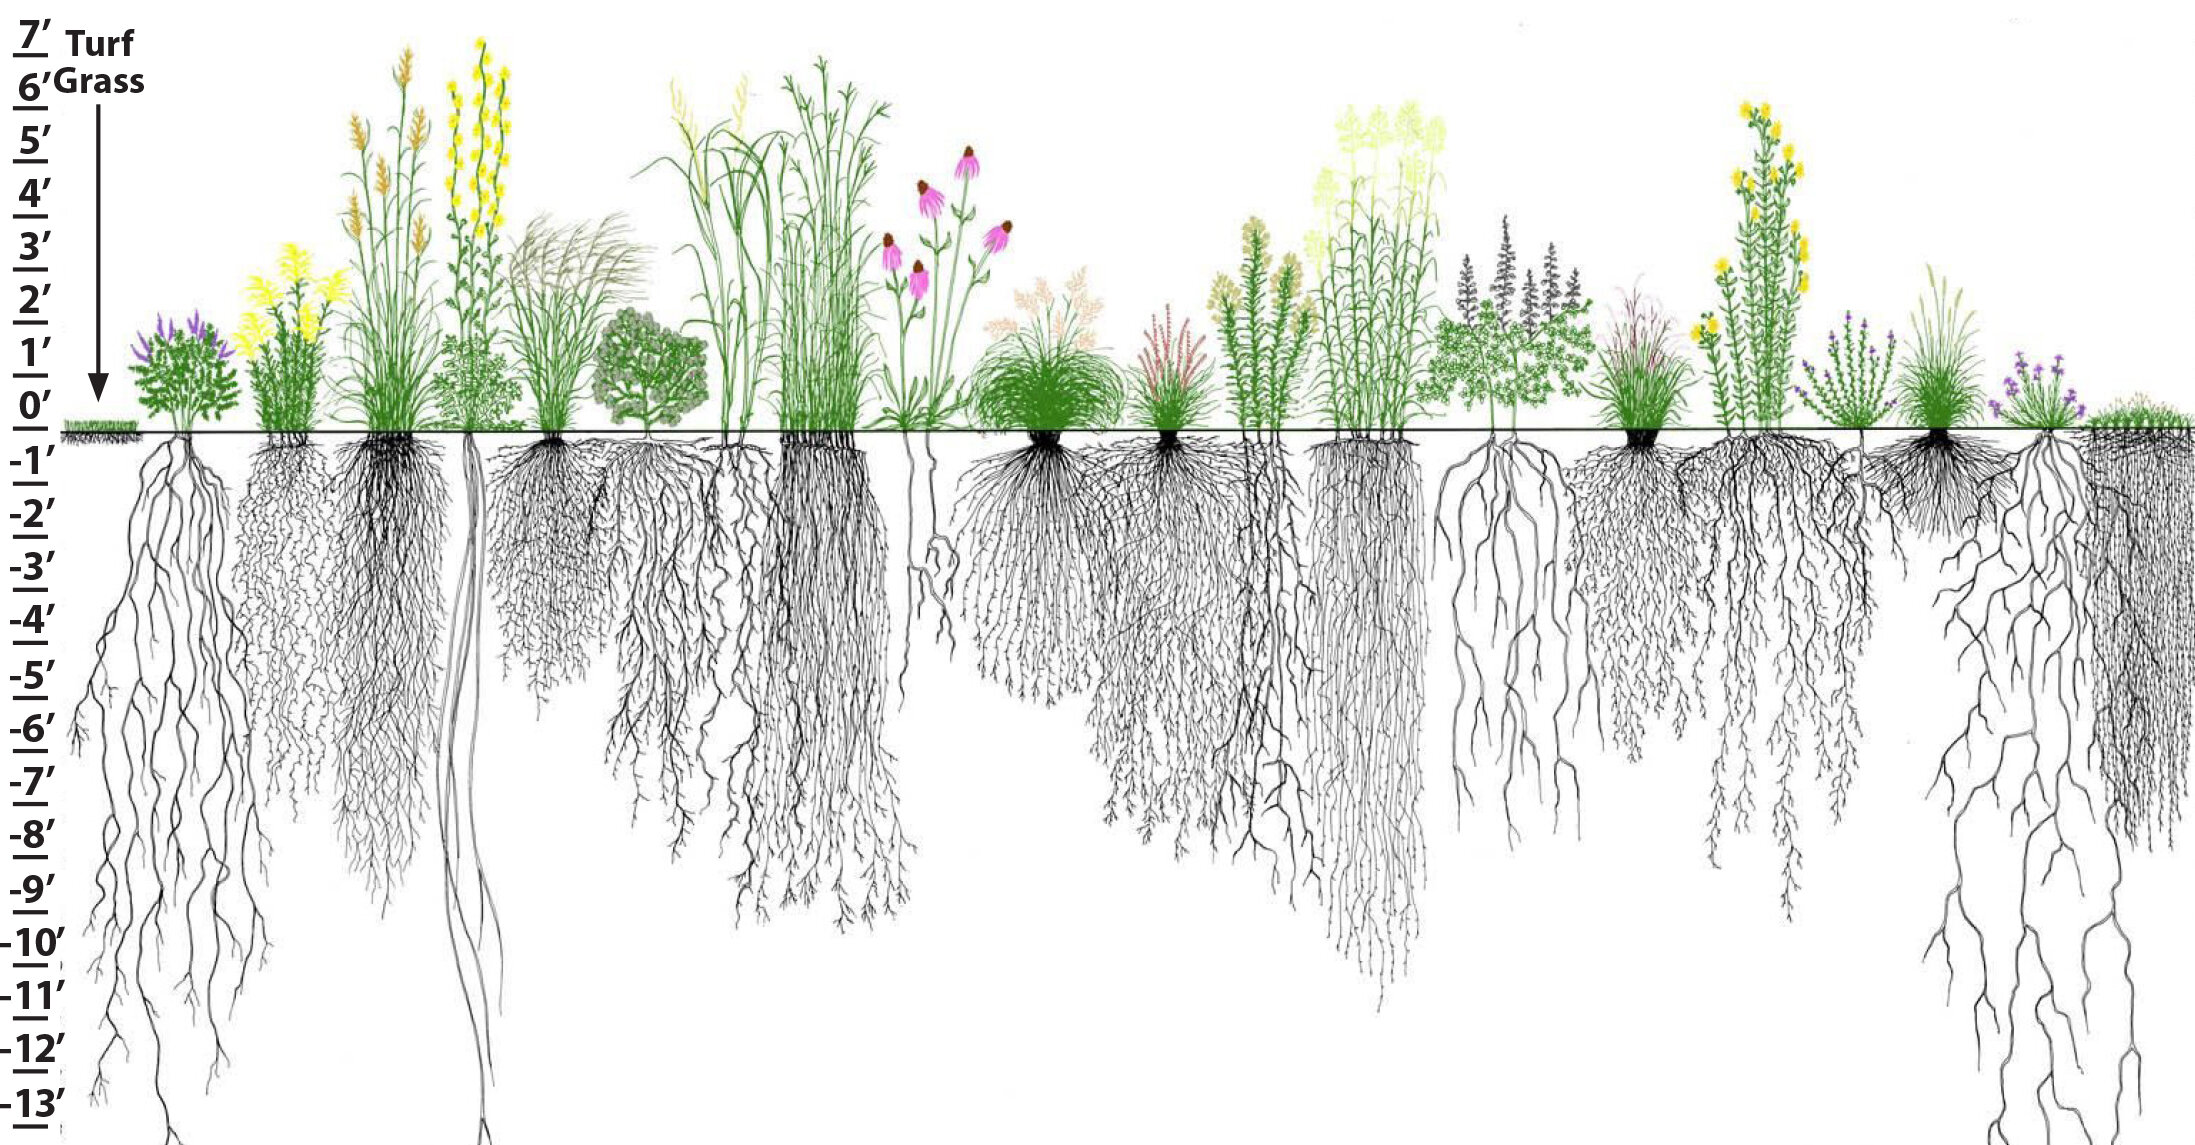 Root structure of turf grass (left) vs. that of native plants.